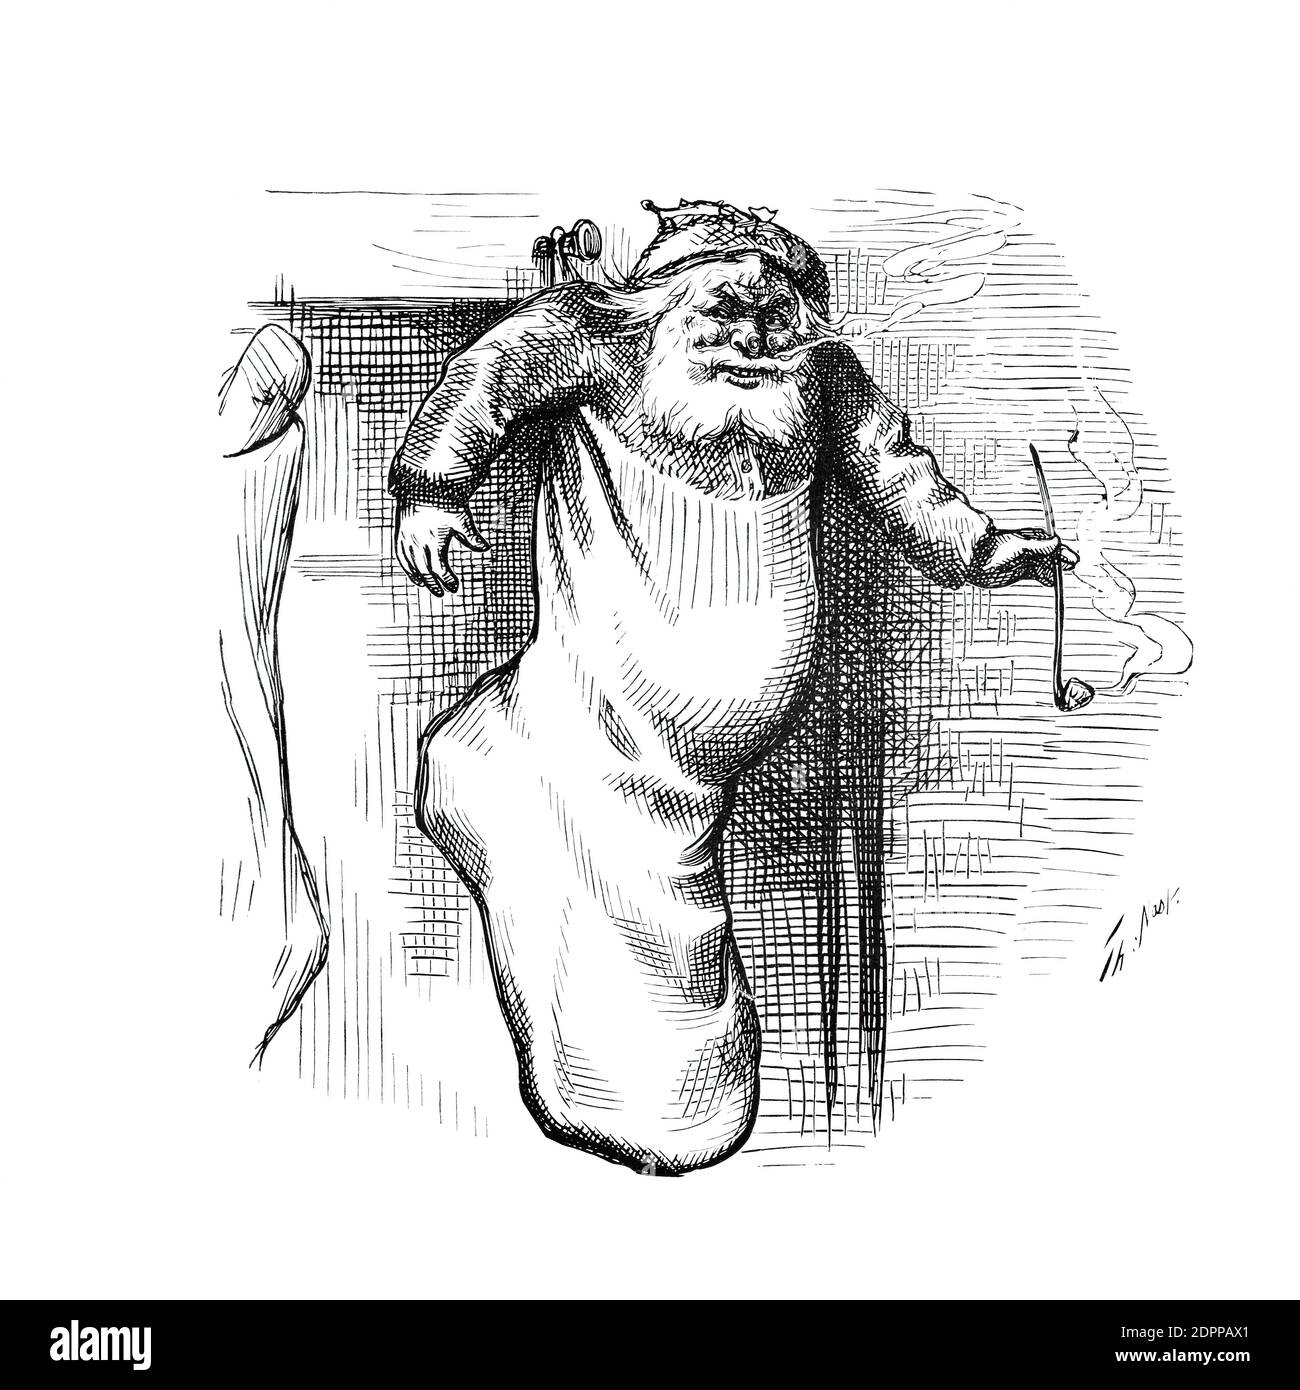 An illustration of Santa Claus in a Christmas stocking by Thomas Nast for Harper's Weekly. Stock Photo